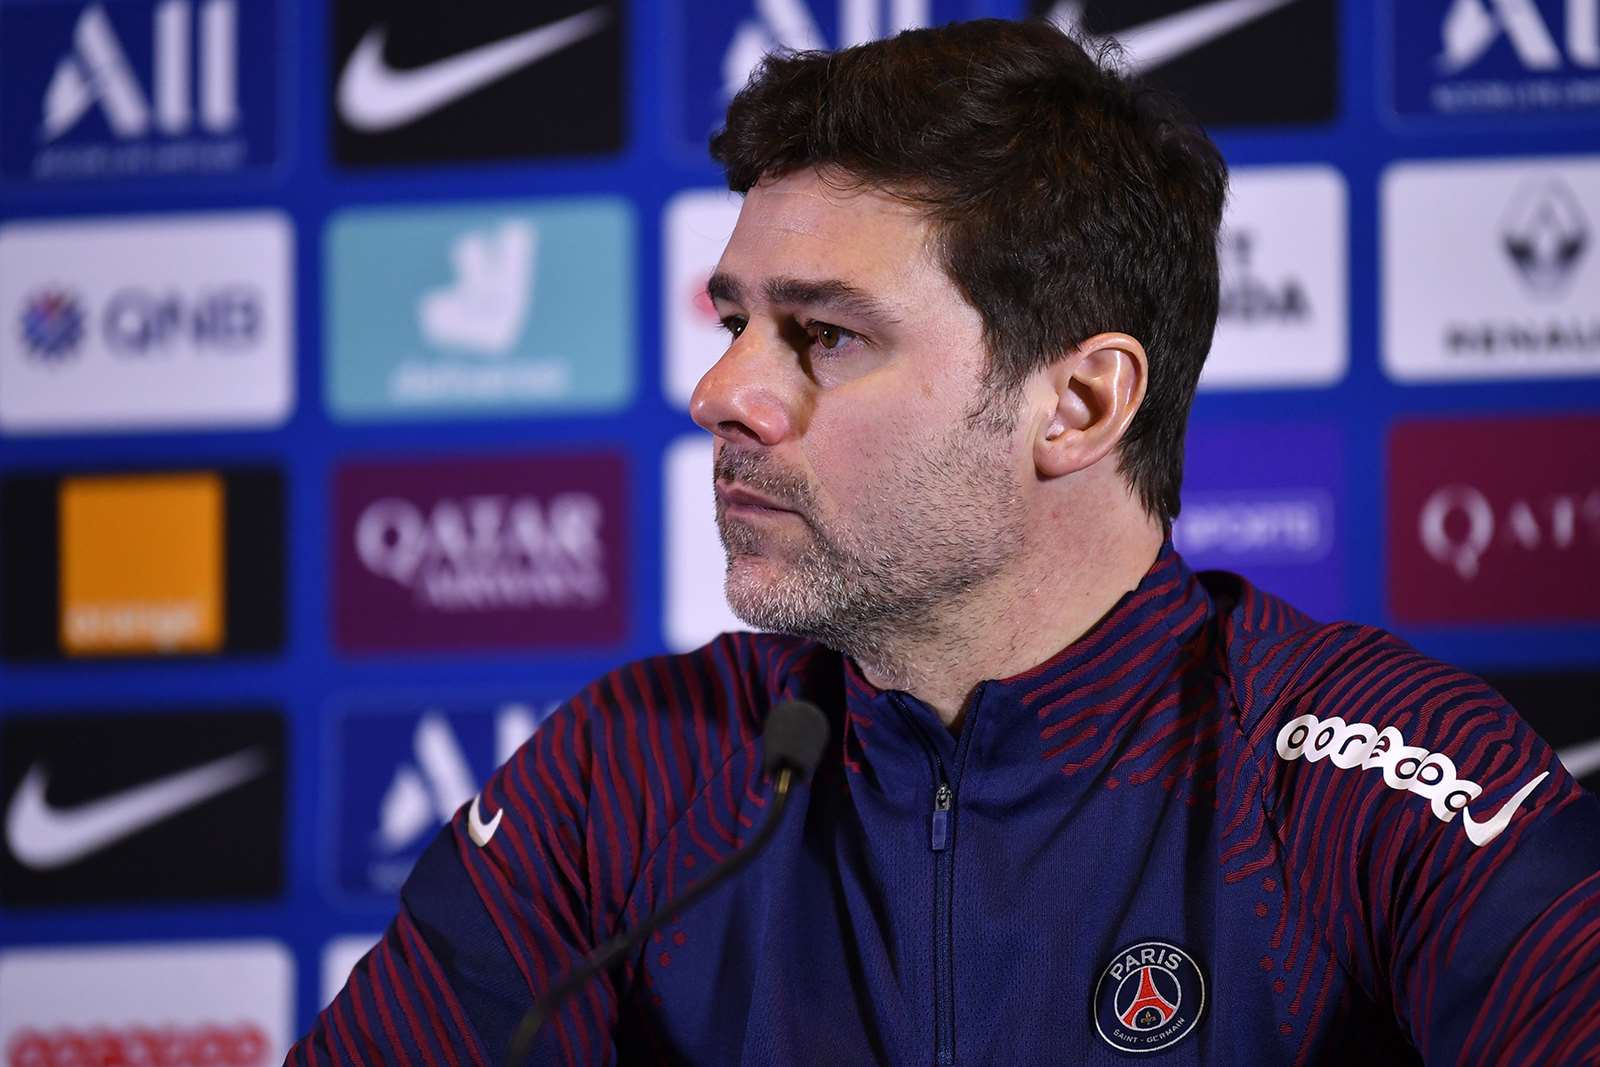 Paris Saint-Germain confirm that they have parted ways with Mauricio Pochettino